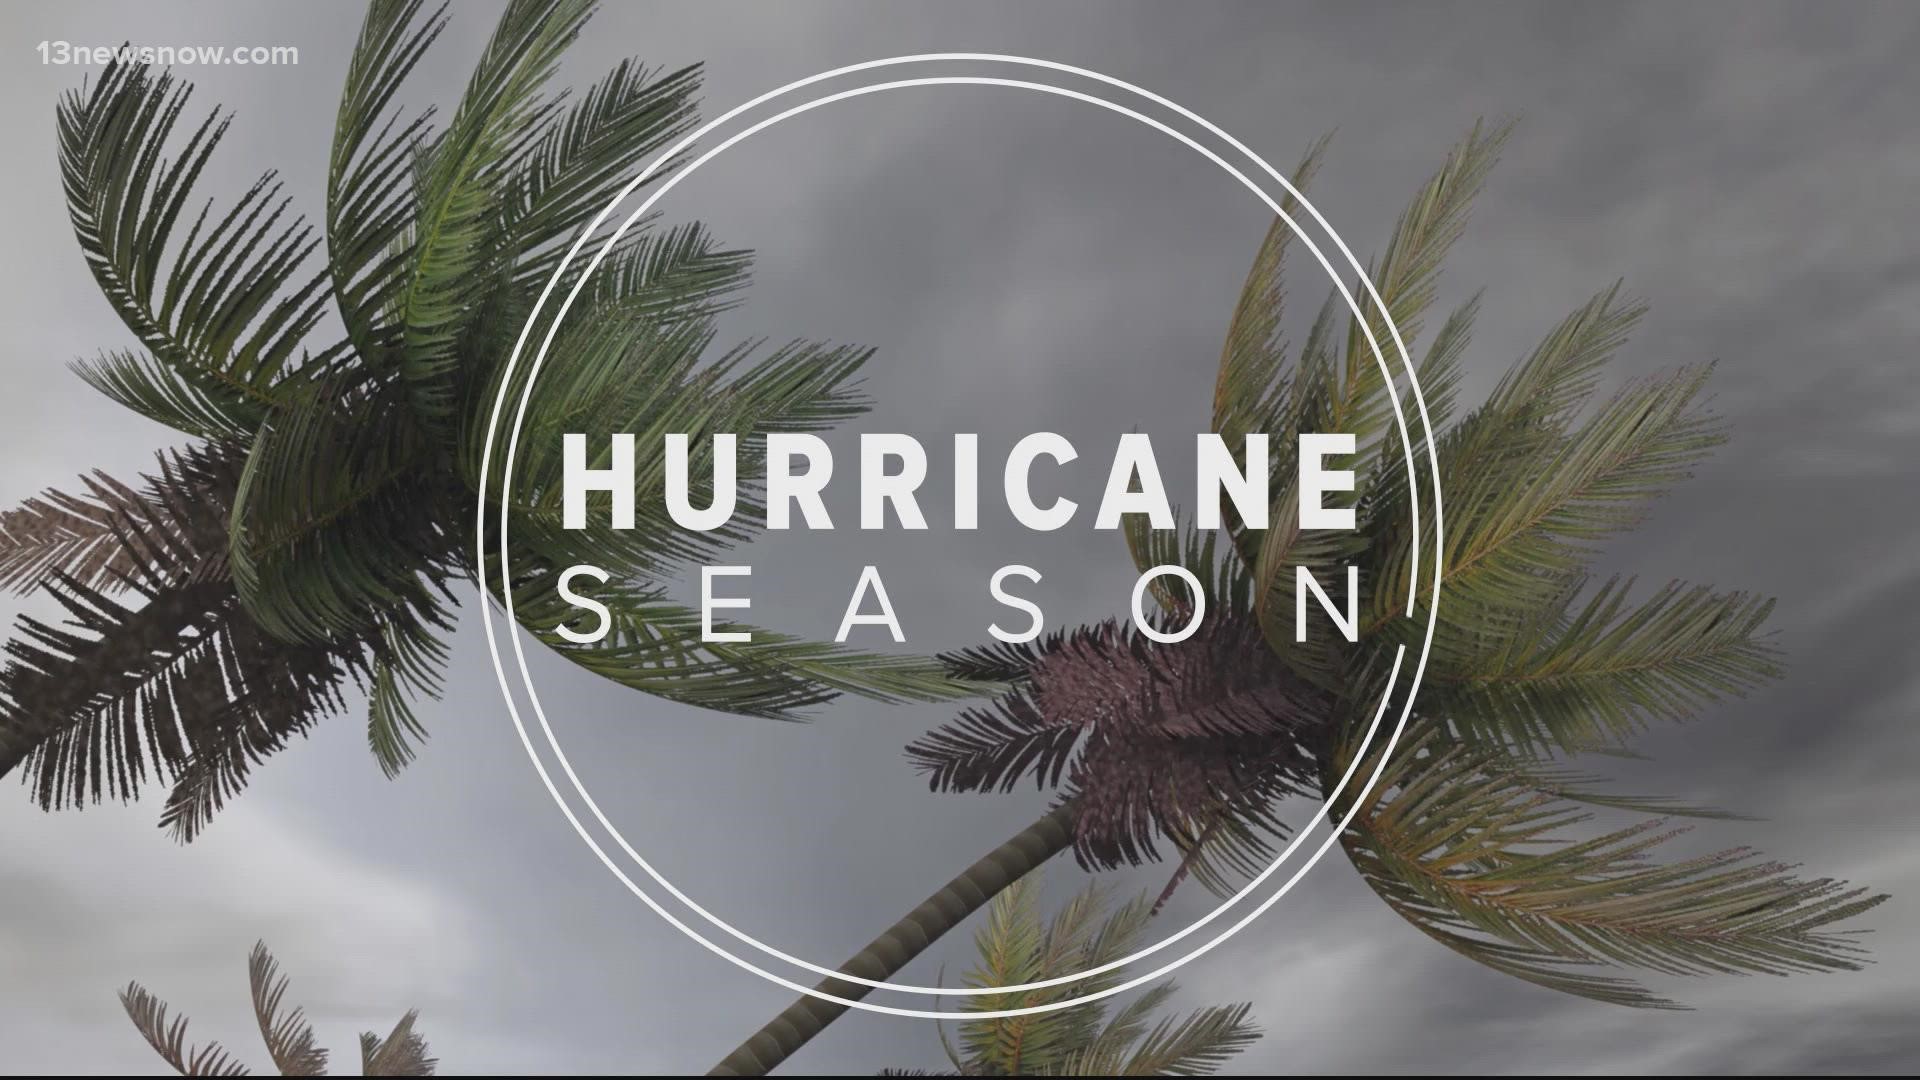 The National Oceanic and Atmospheric Administration (NOAA) is forecasting another busy Atlantic hurricane season for 2022, thanks in part to a La Nina.